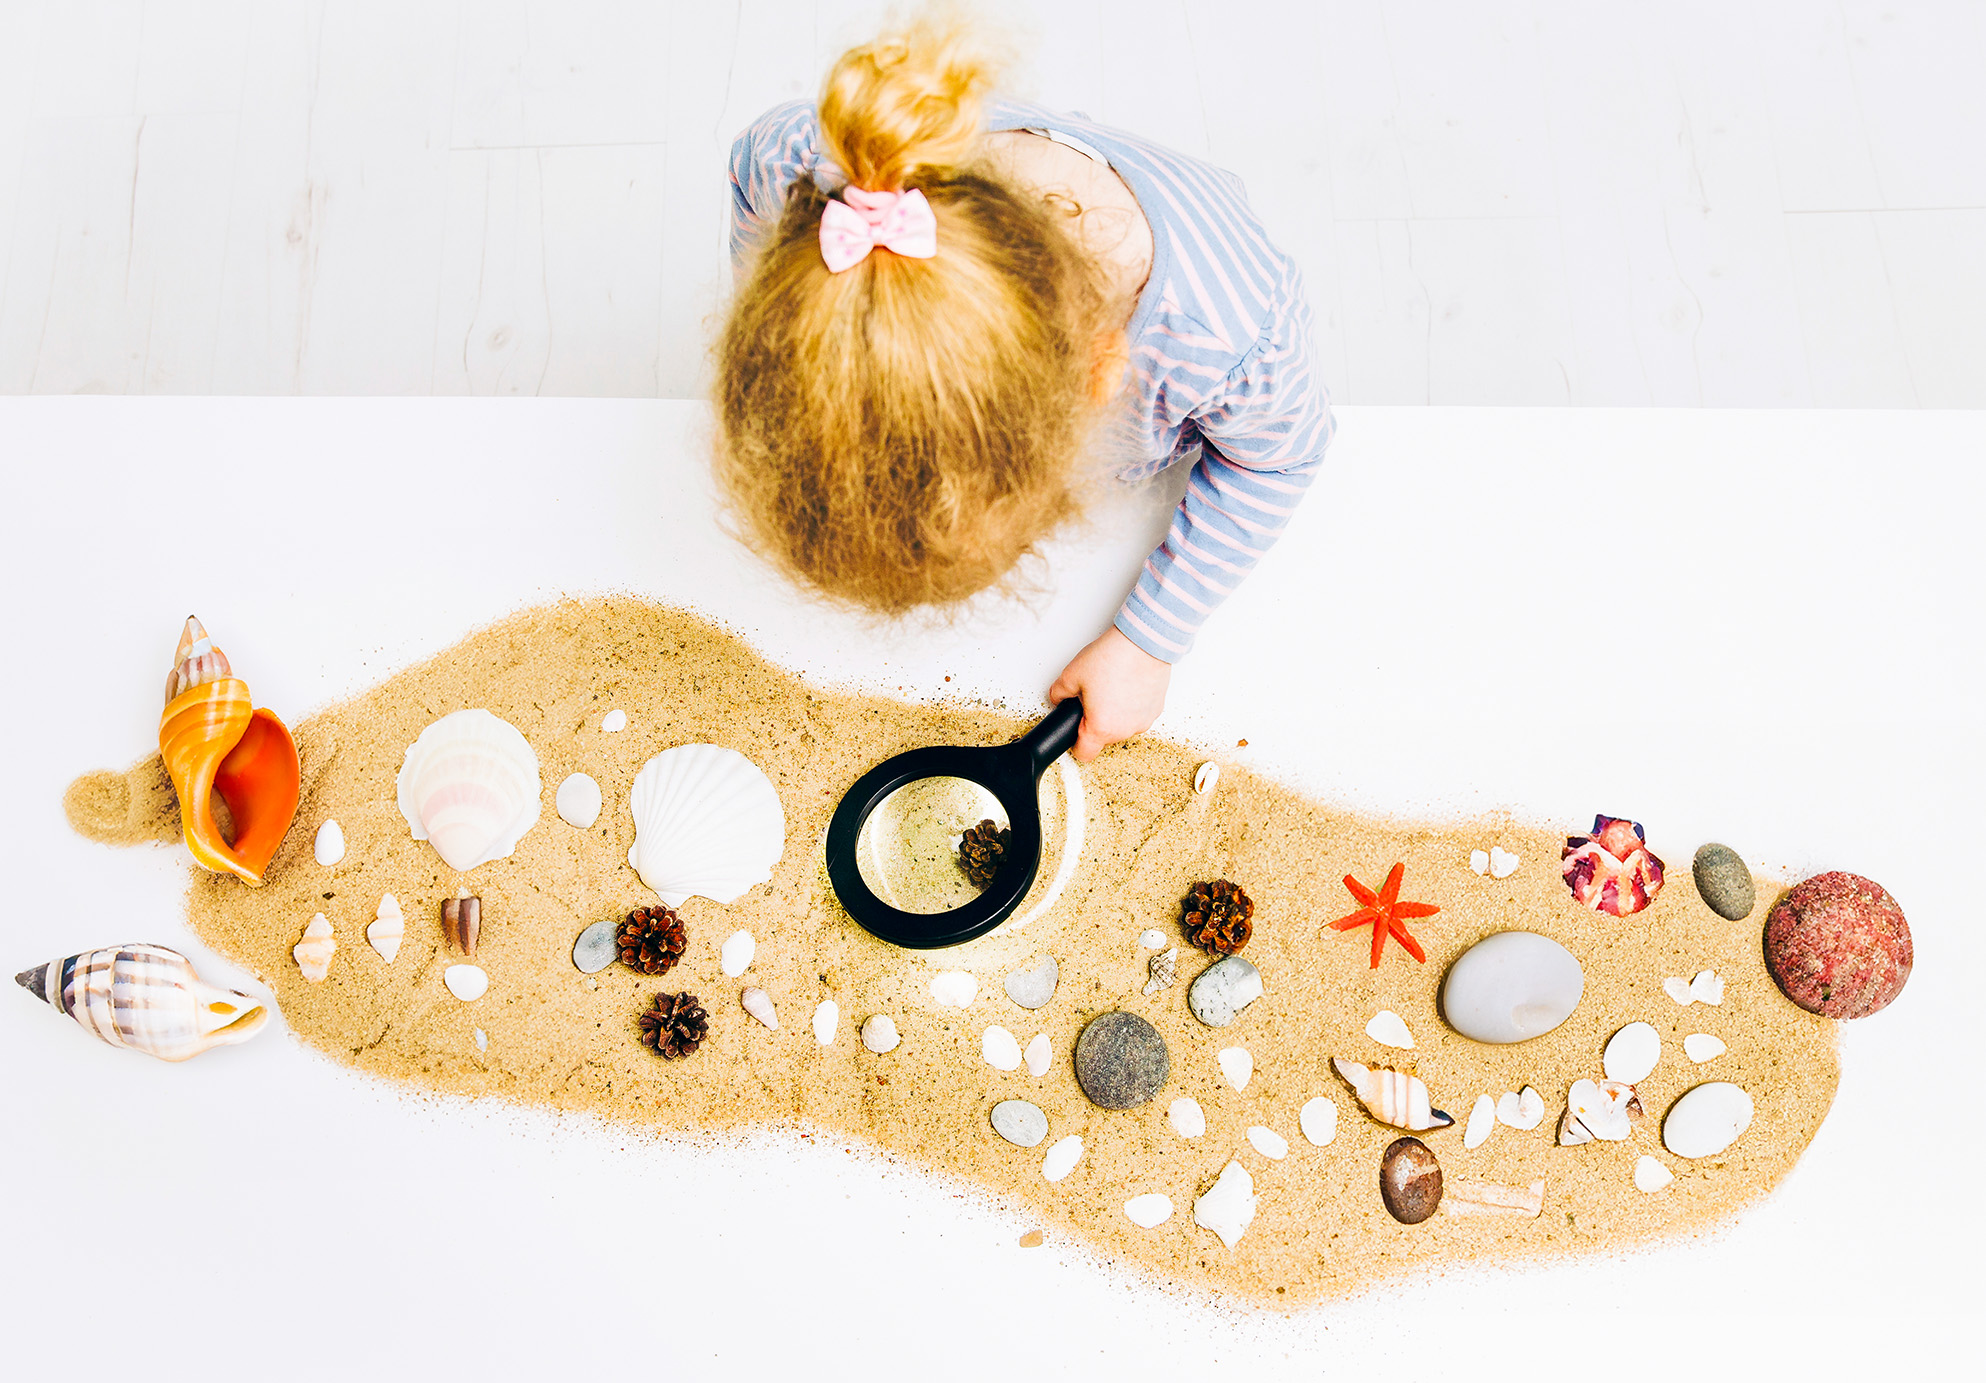 Overhead view of a young child, using a magnifying glass to inspect sand and seashells